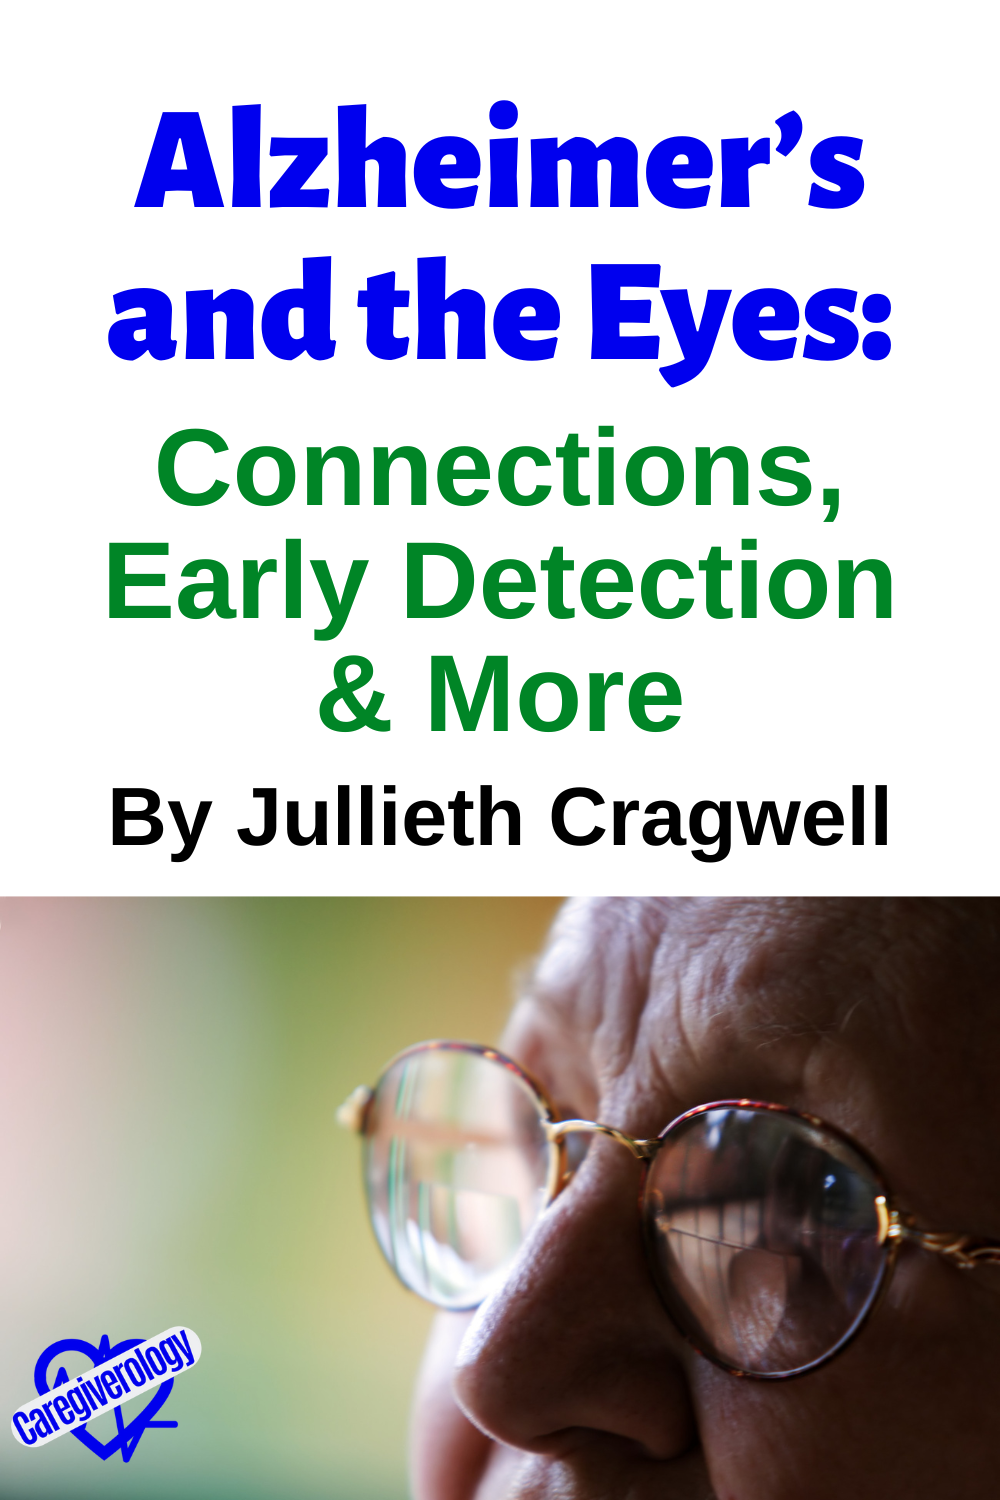 Alzheimer’s and the Eyes: Connections, Early Detection and More